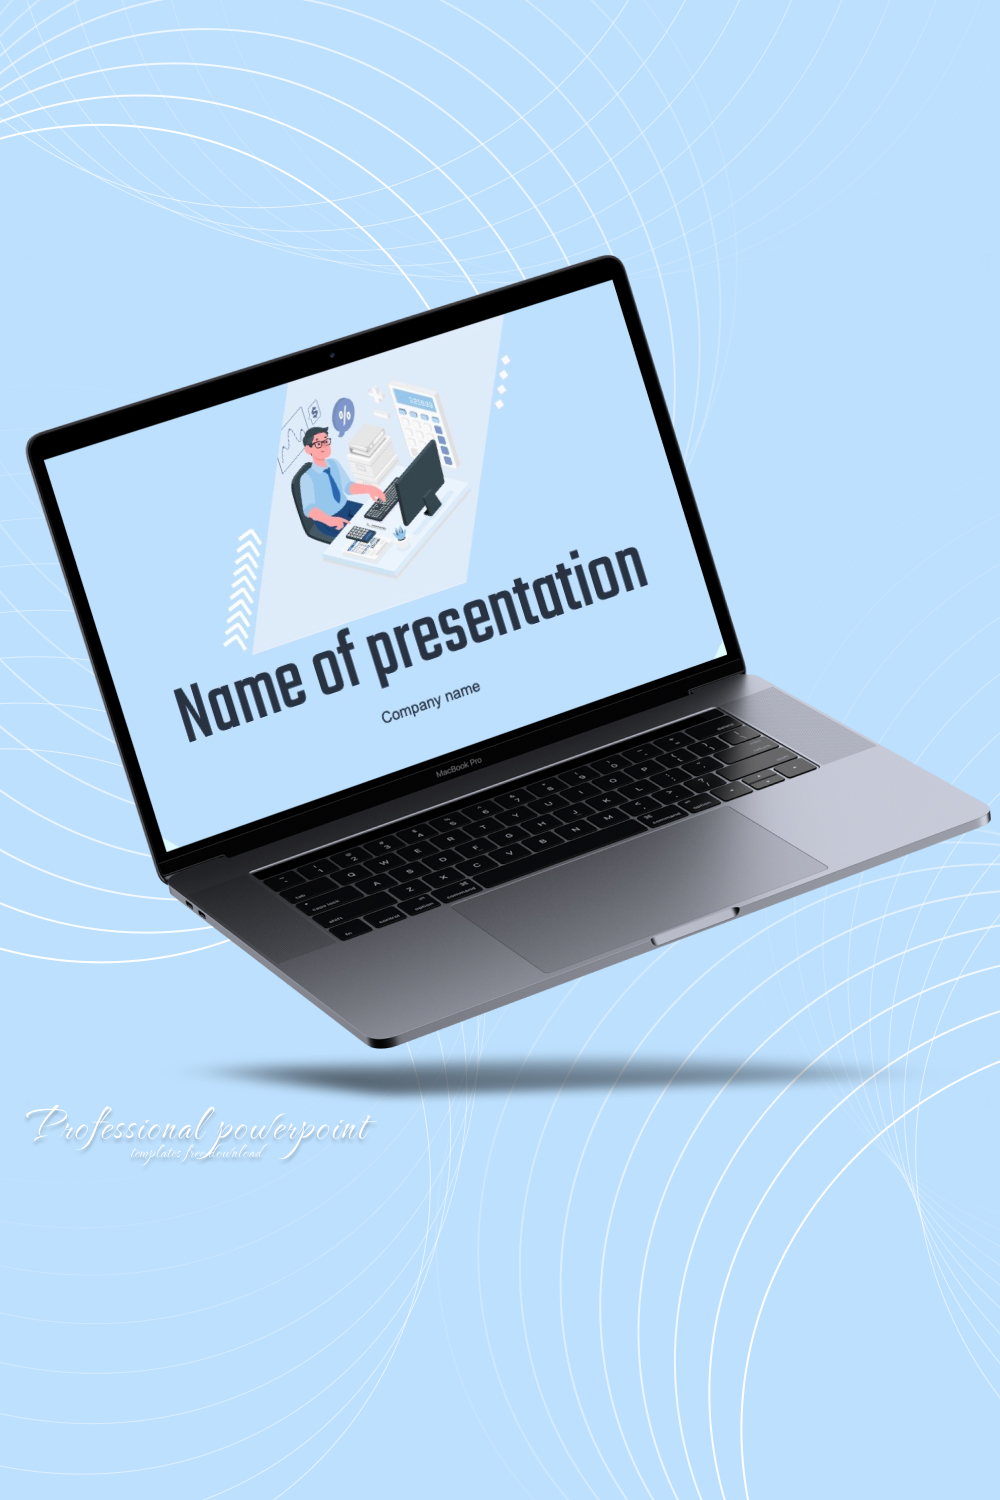 Professional powerpoint templates free download of pinterest.